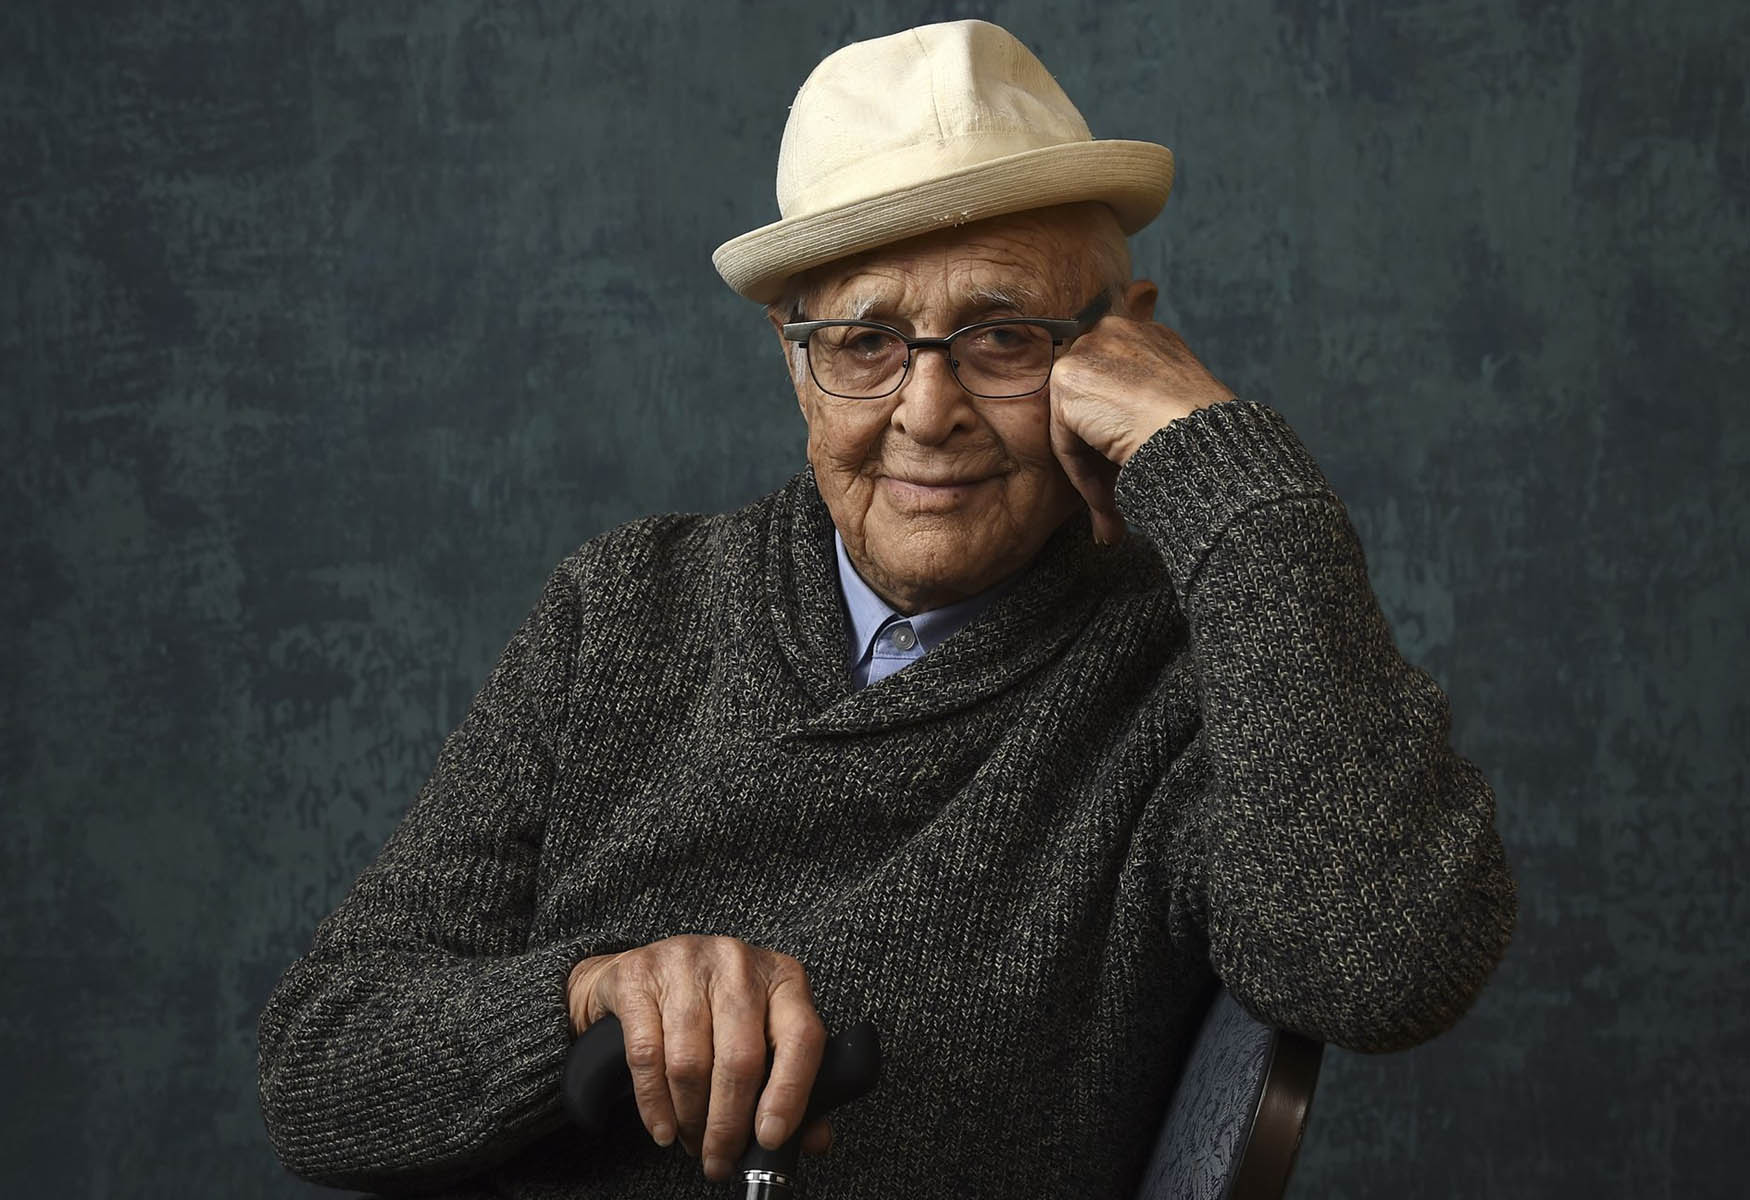 a-tribute-to-norman-lear-legendary-tv-icon-and-creator-of-all-in-the-family-passes-away-at-101